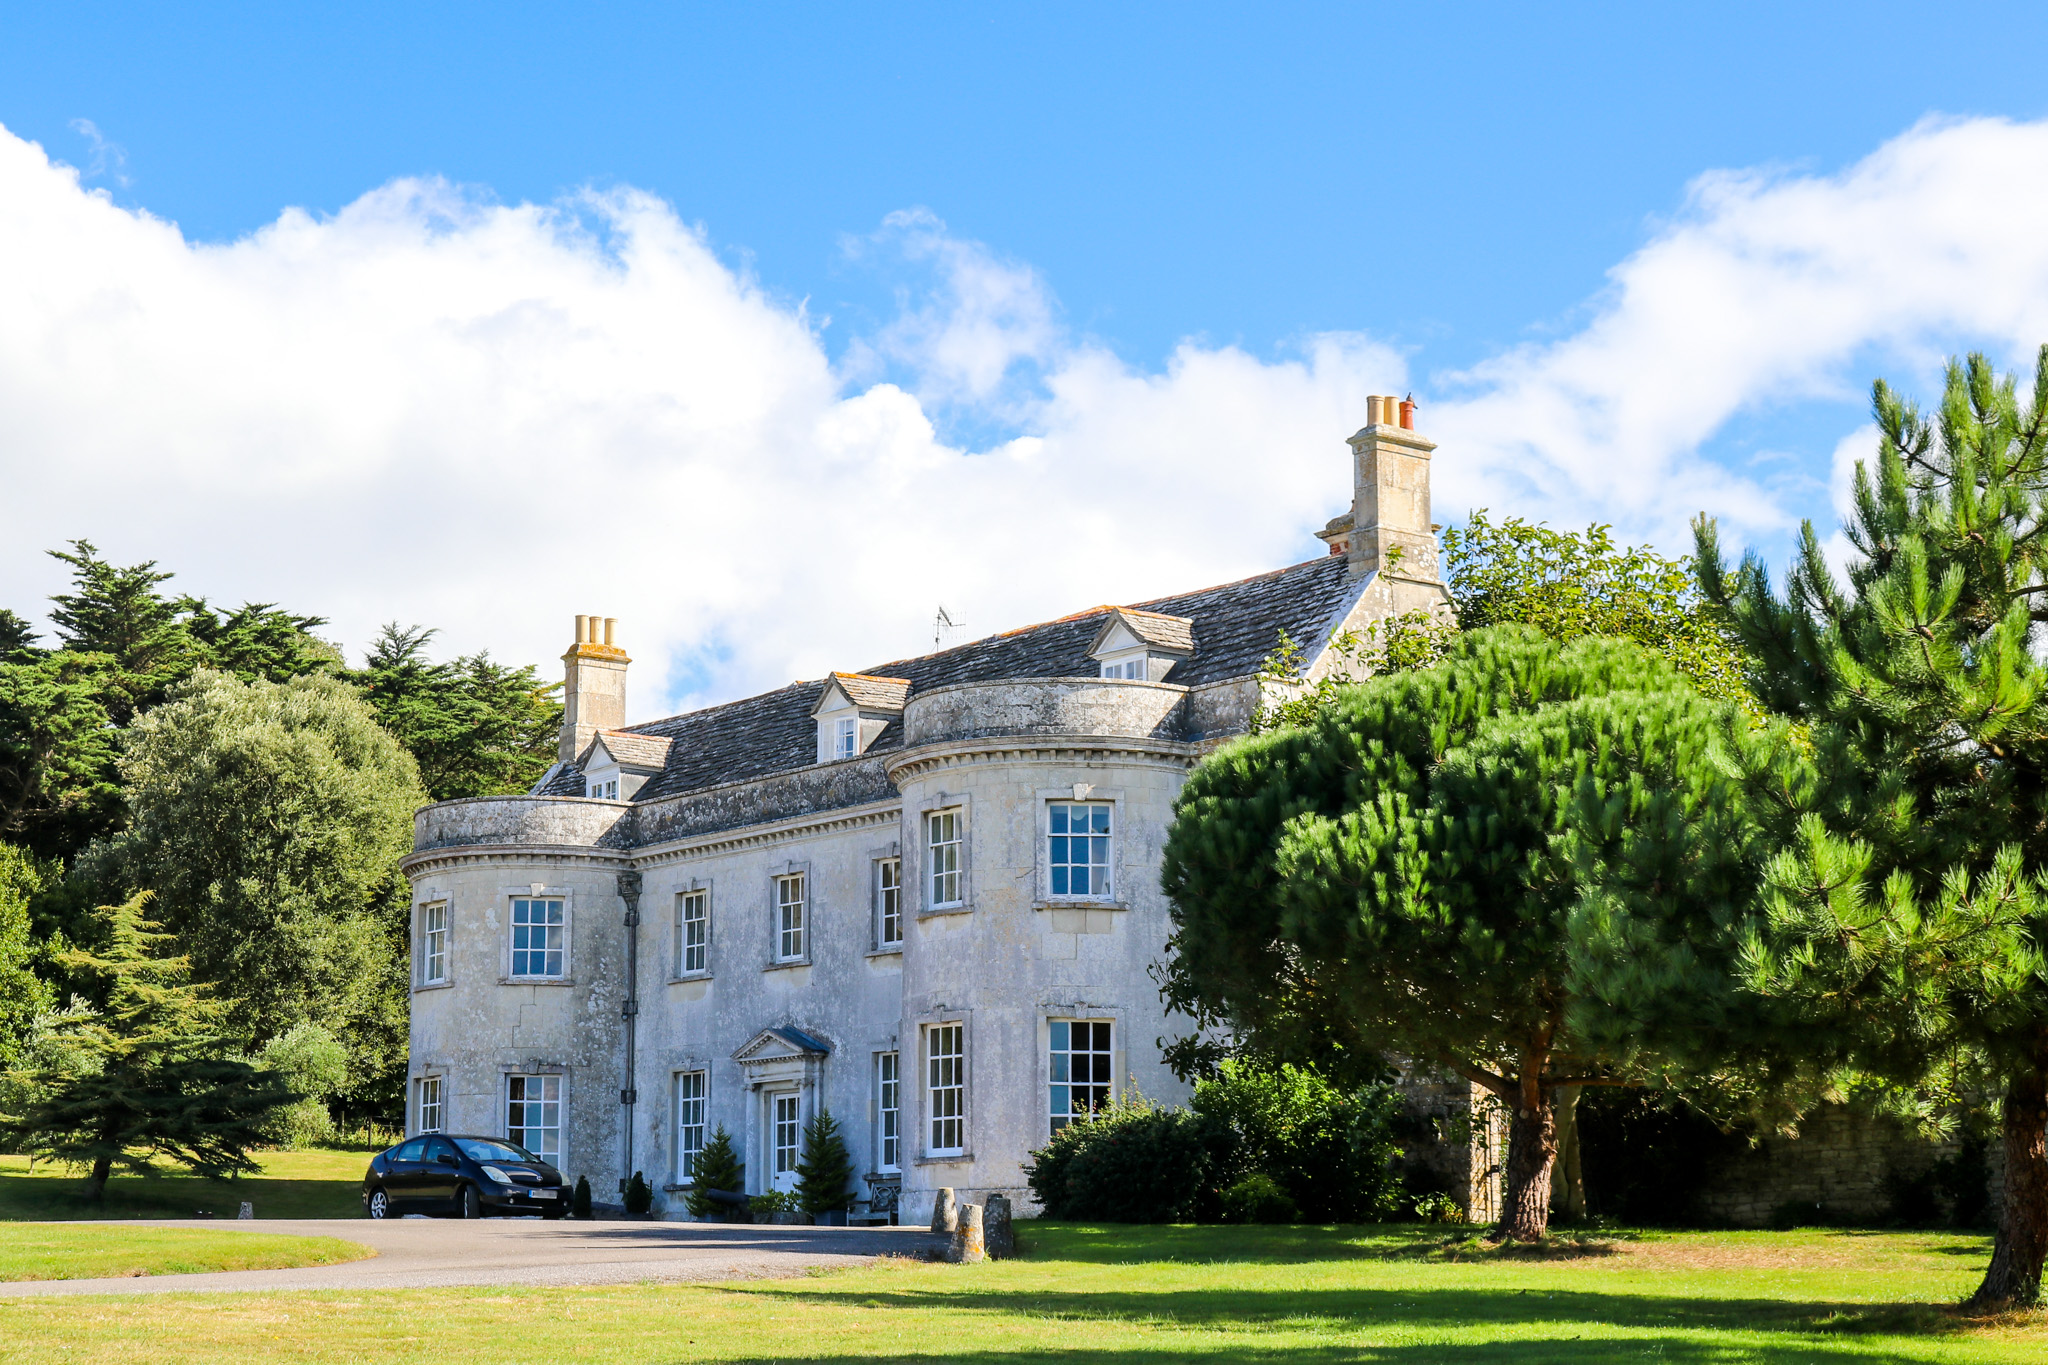 Accommodation for hire at Kimmeridge's Smedmore House